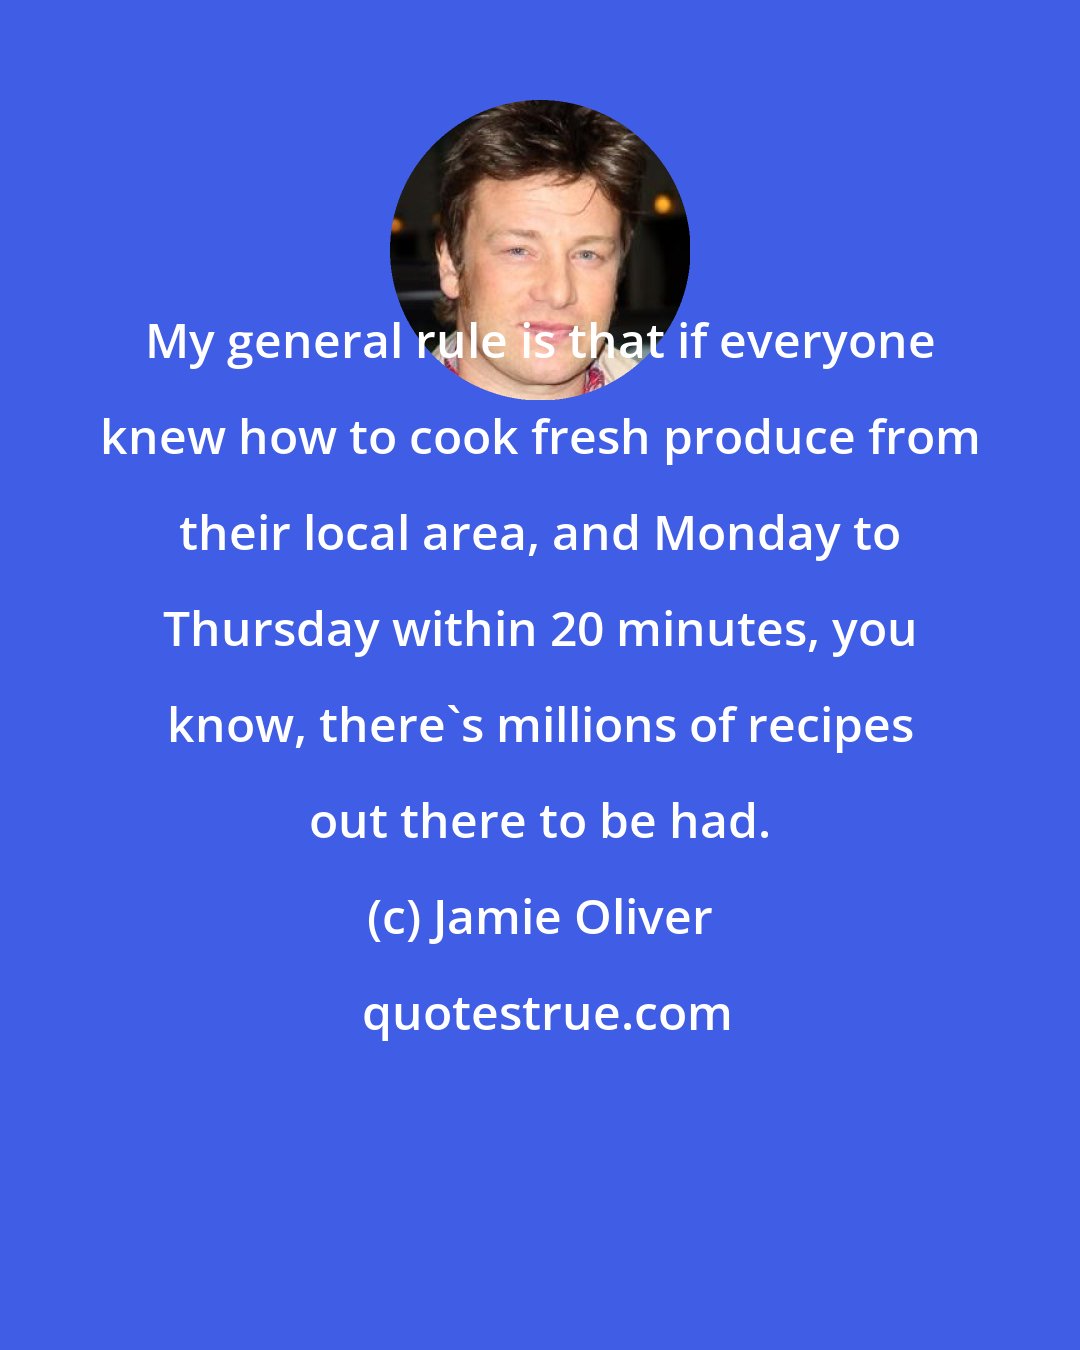 Jamie Oliver: My general rule is that if everyone knew how to cook fresh produce from their local area, and Monday to Thursday within 20 minutes, you know, there's millions of recipes out there to be had.